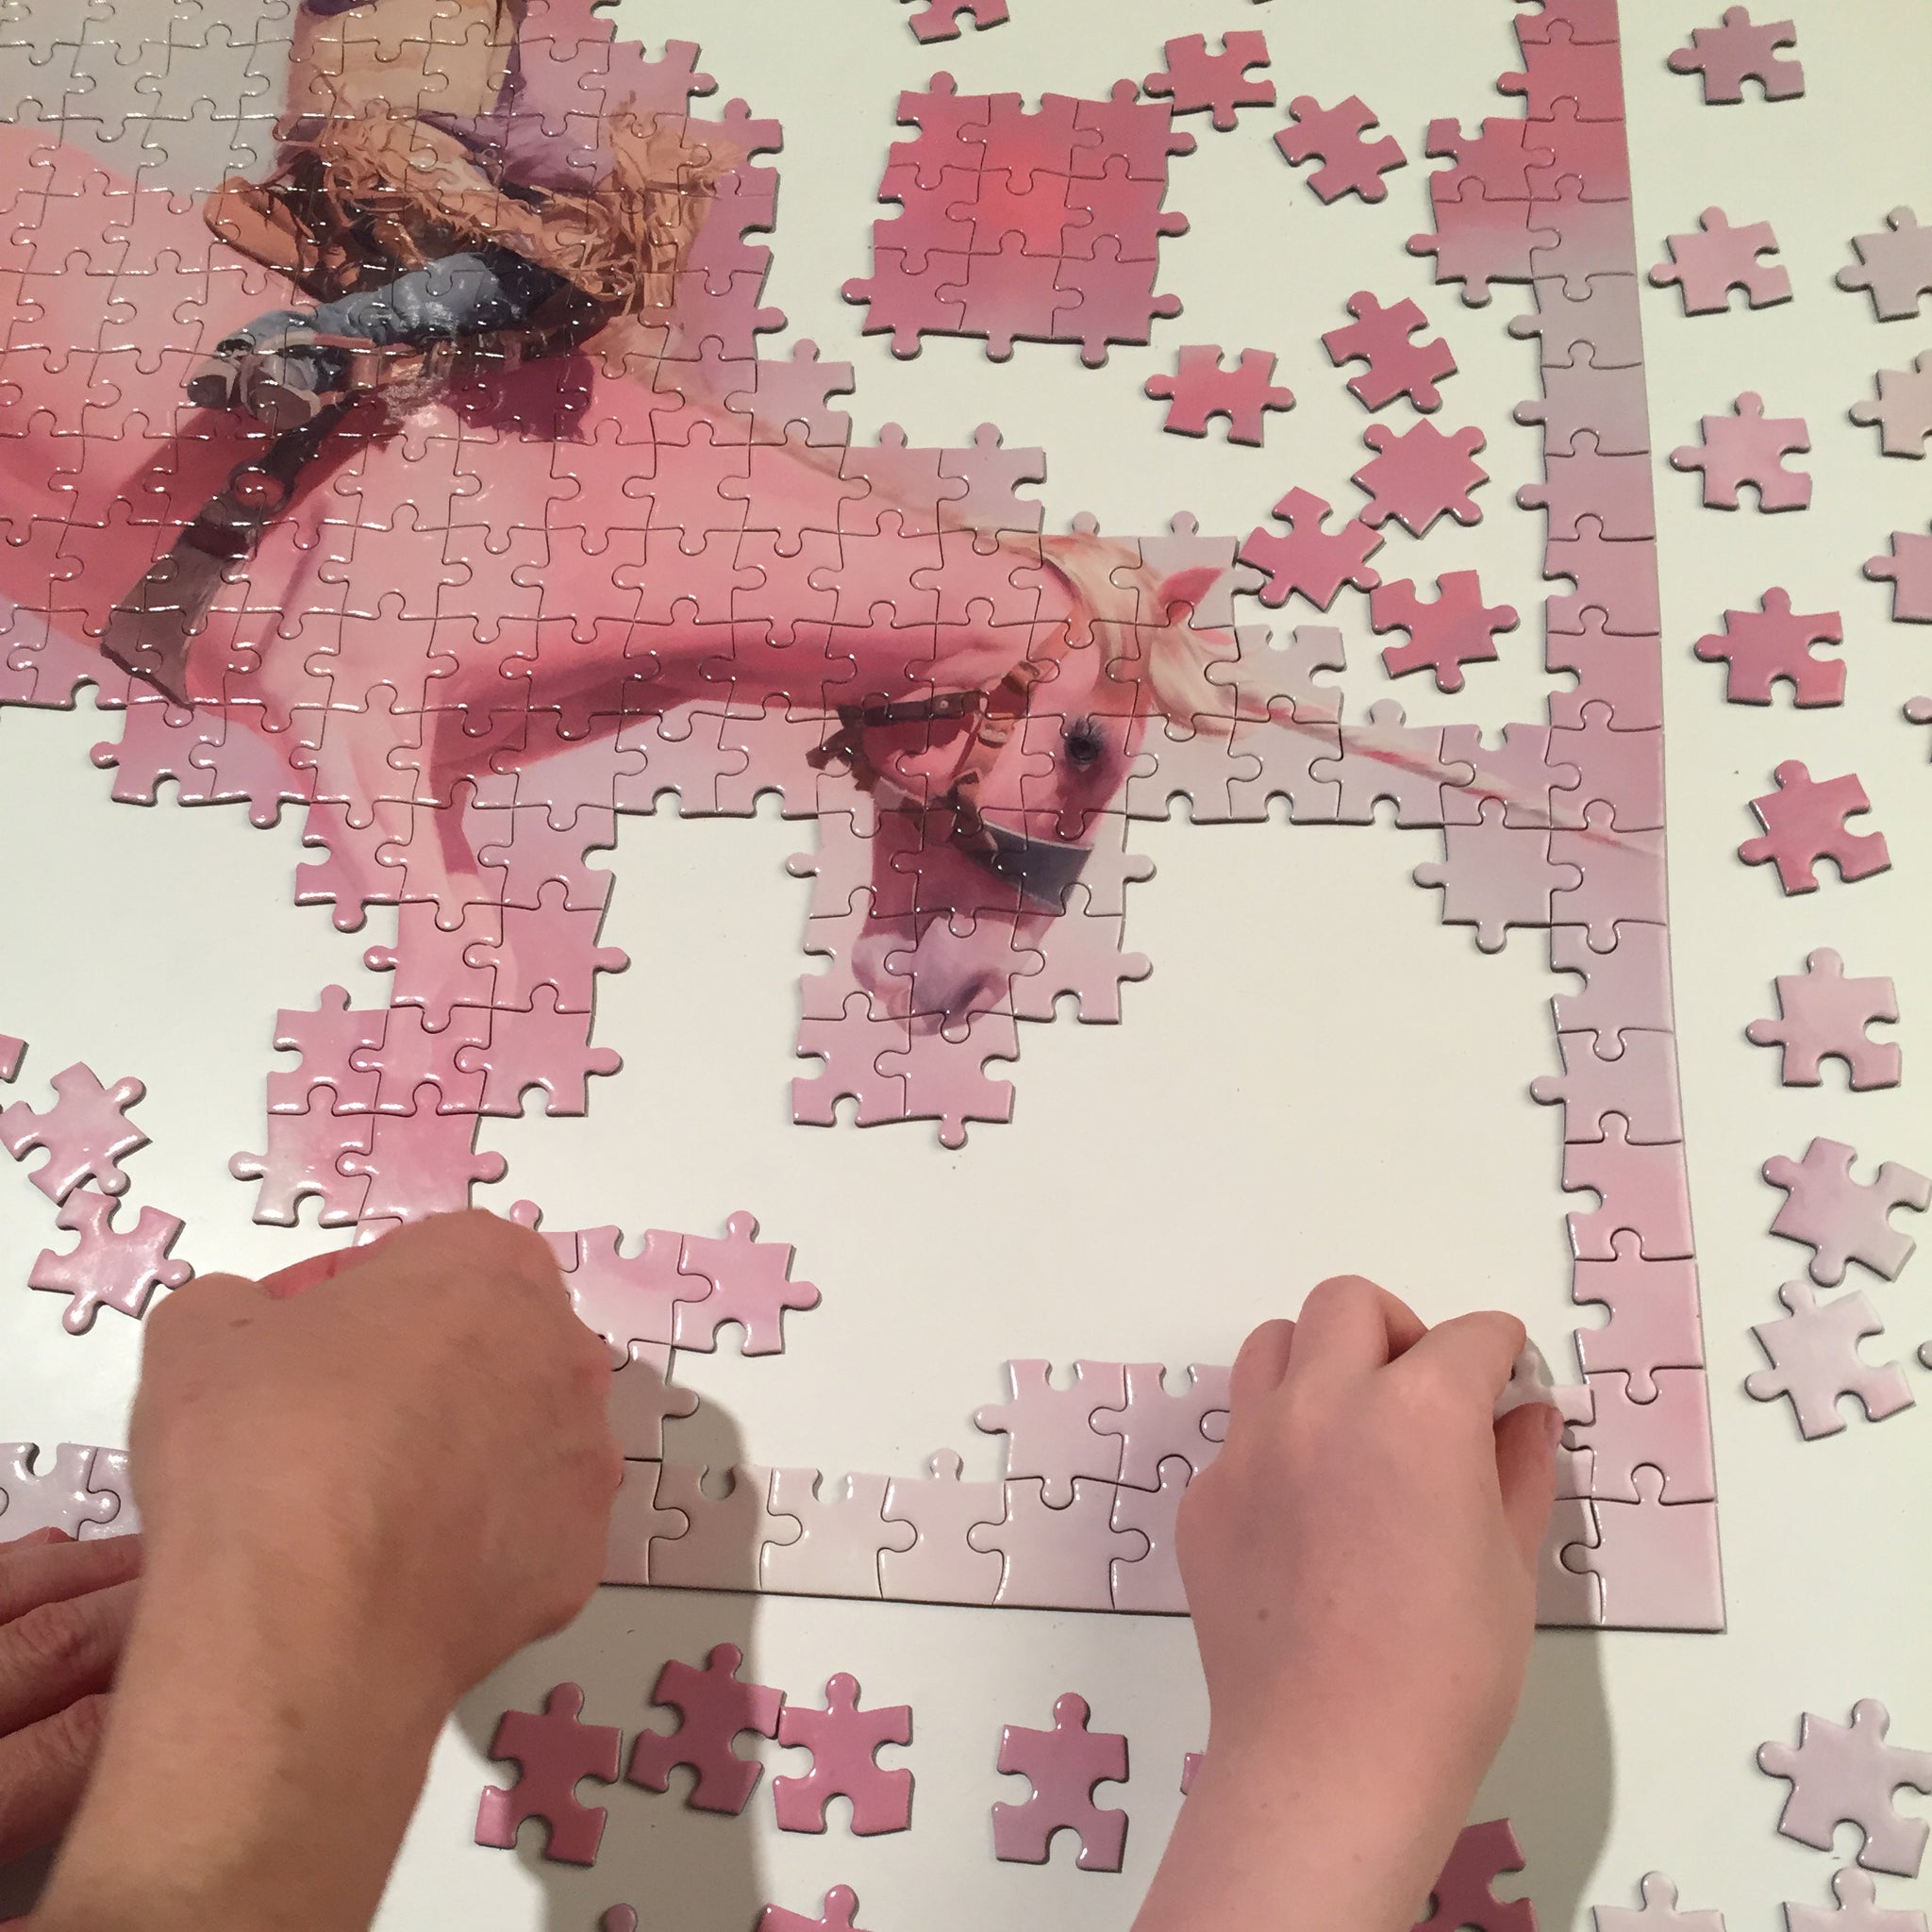 Artist Will Cotton Puzzle: Unlimited Collector Edition Jigsaw Puzzle